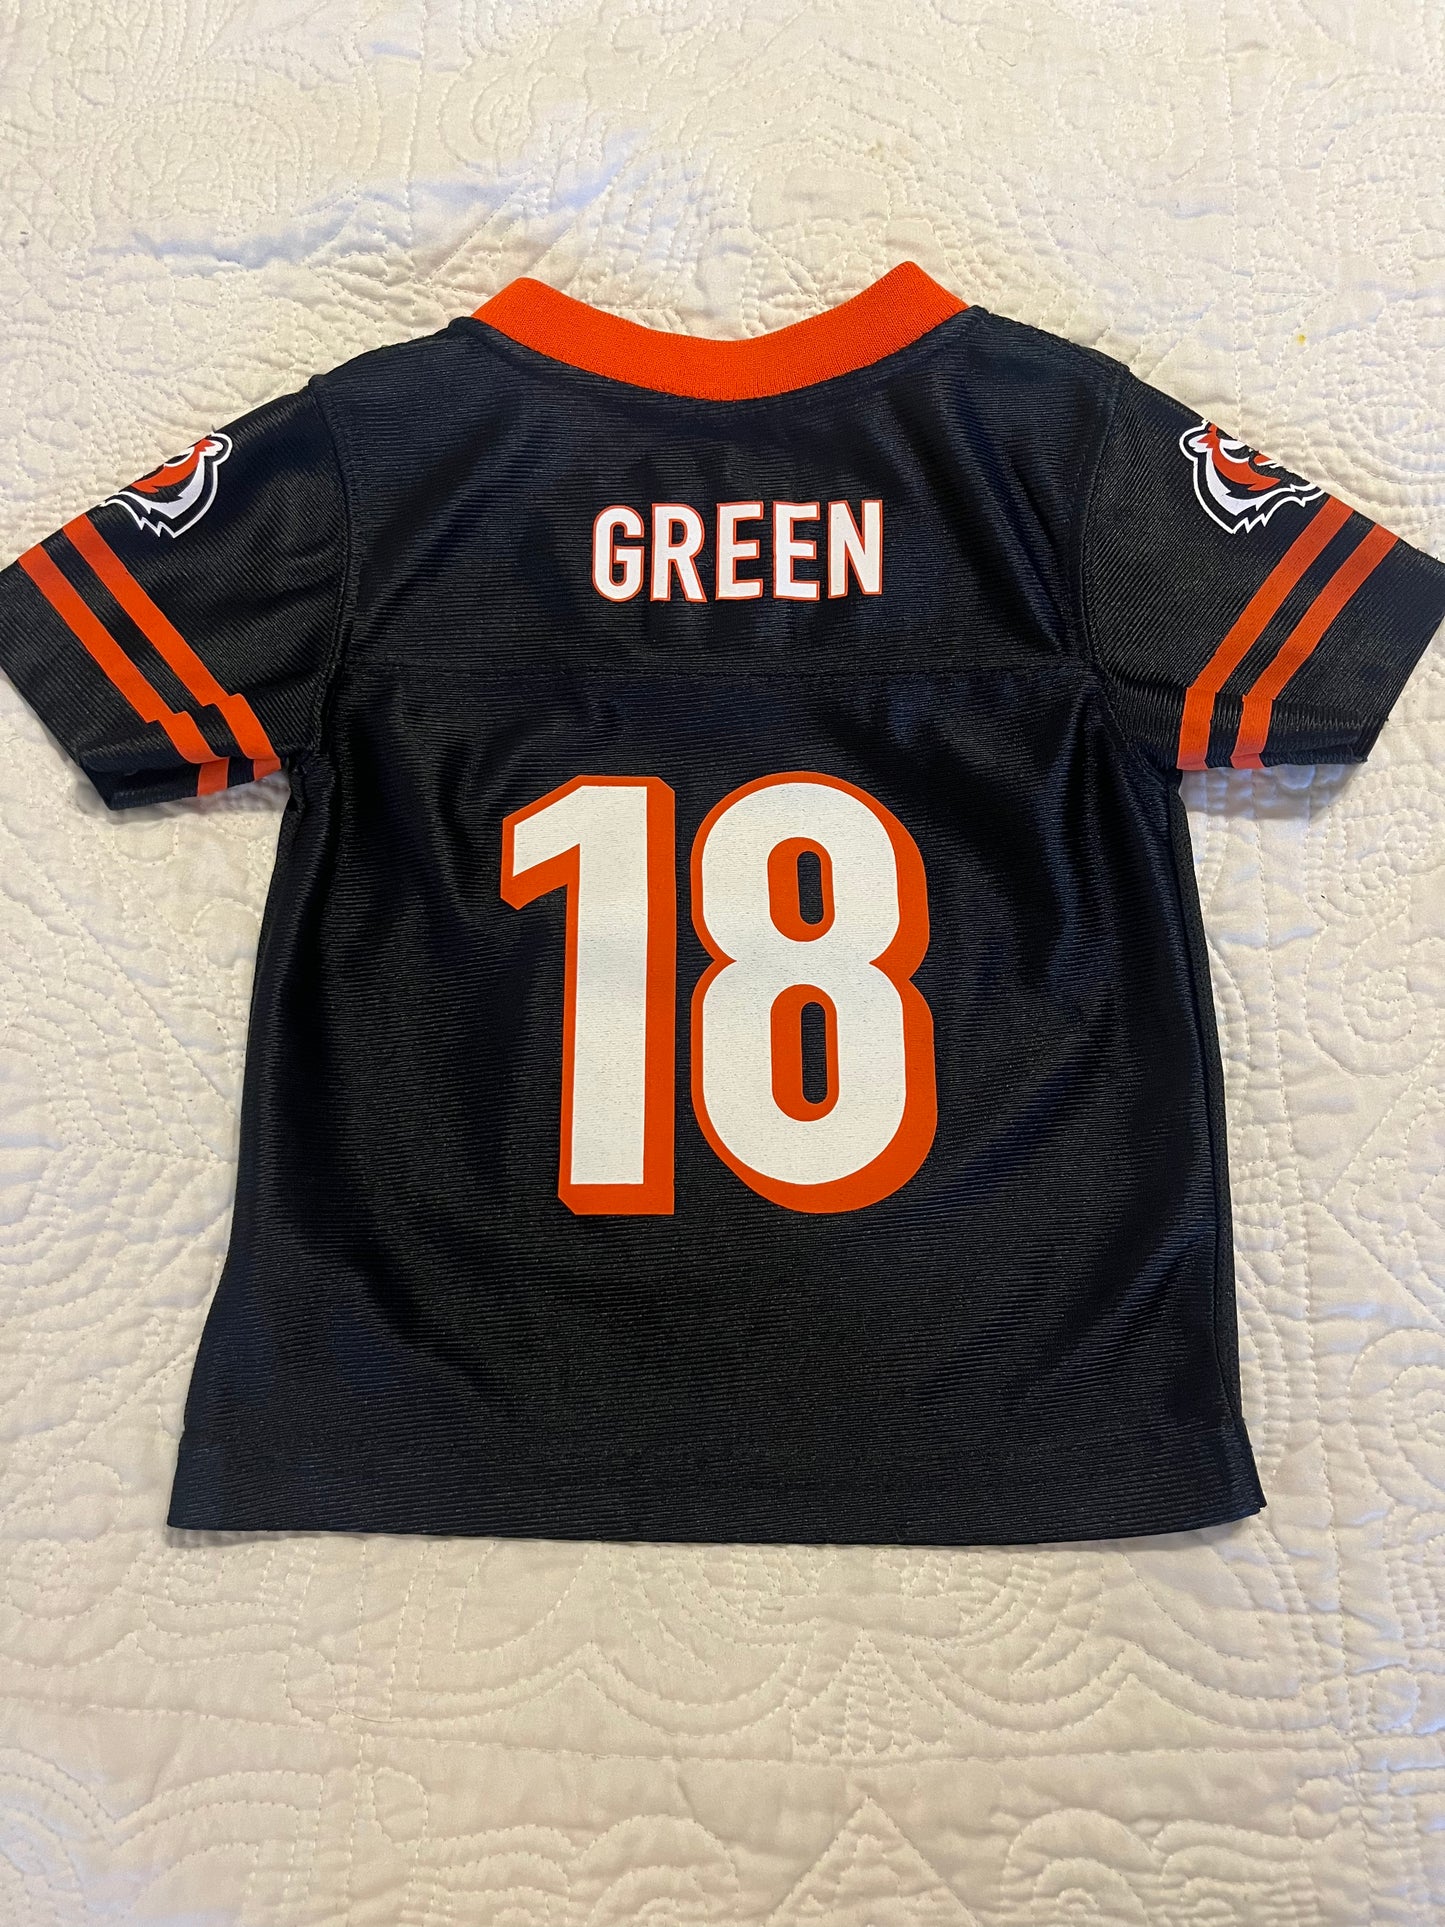 REDUCED: Bengals Jersey 12M